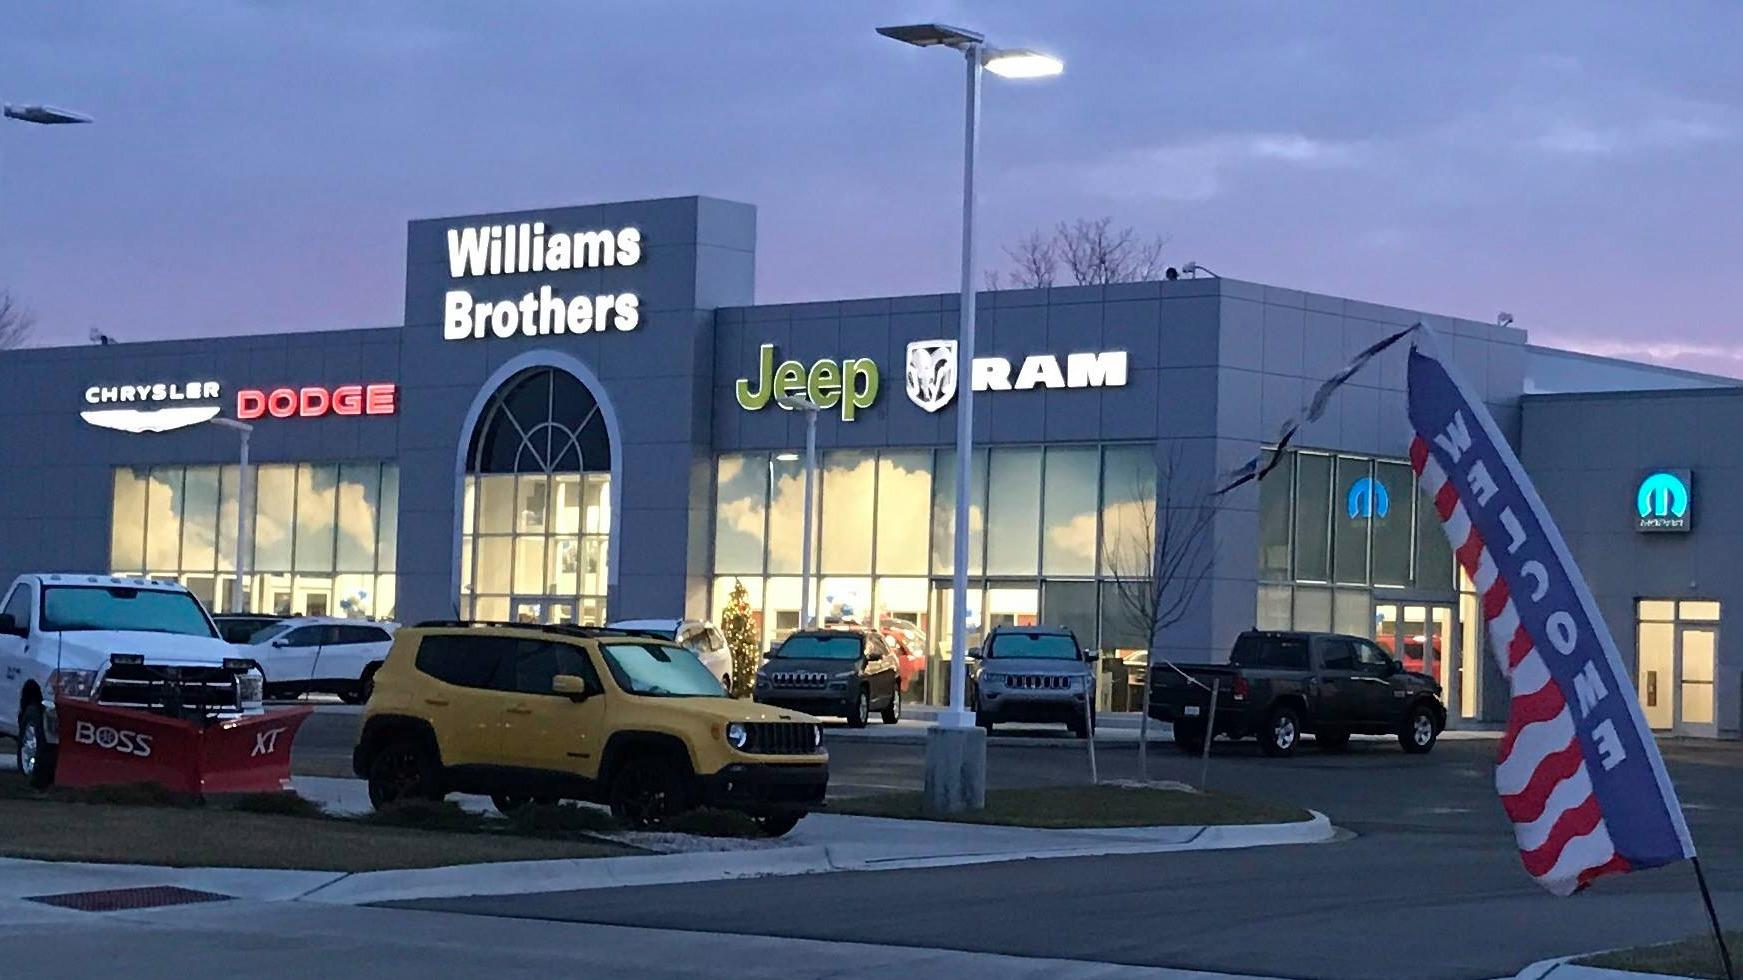 Williams Brothers Chrysler Dodge Jeep Ram of Dundee